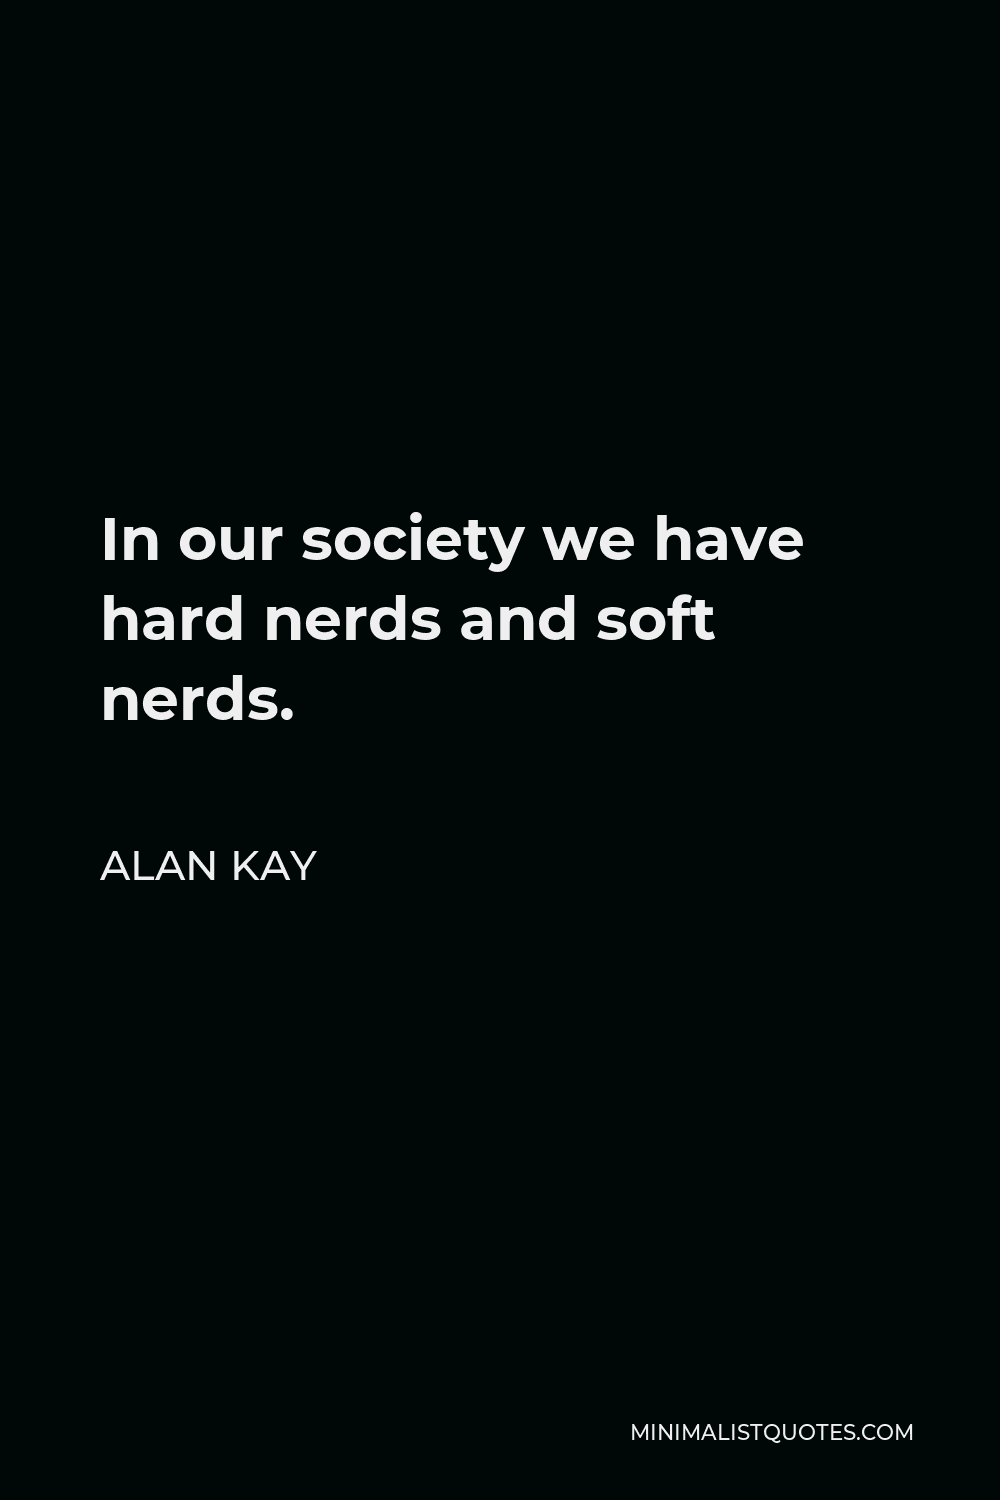 Alan Kay Quote - In our society we have hard nerds and soft nerds.